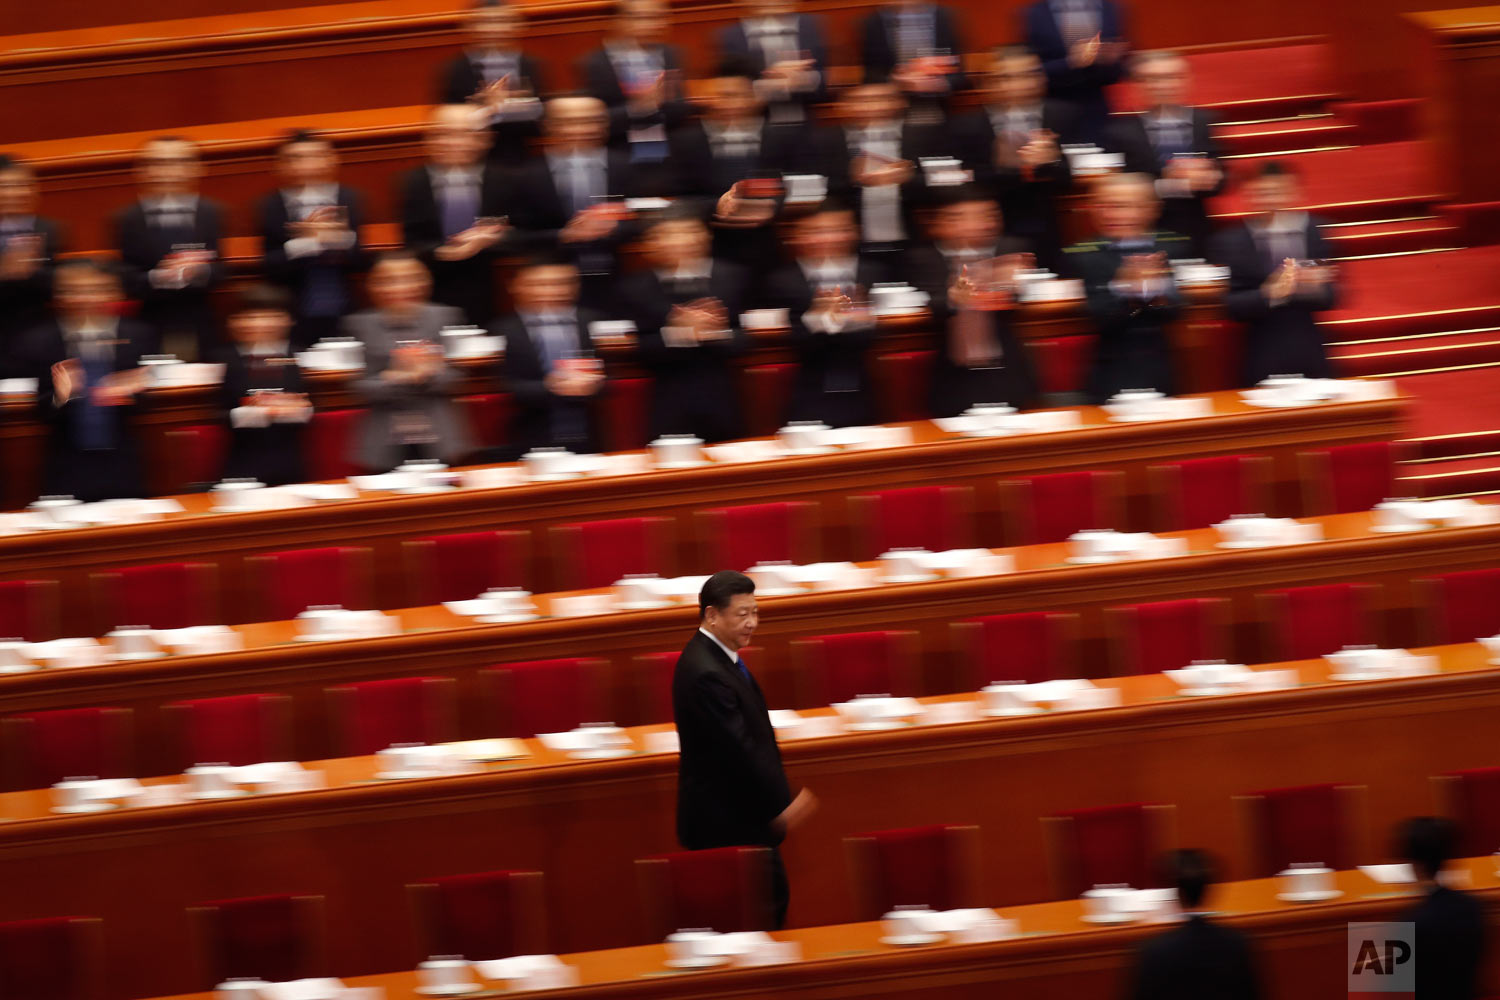  Delegates applaud as President Xi Jinping arrives for a plenary session of China's National People's Congress (NPC) at the Great Hall of the People in Beijing on Tuesday, March 13, 2018. On Sunday, China's legislature scrapped a two-term limit on th